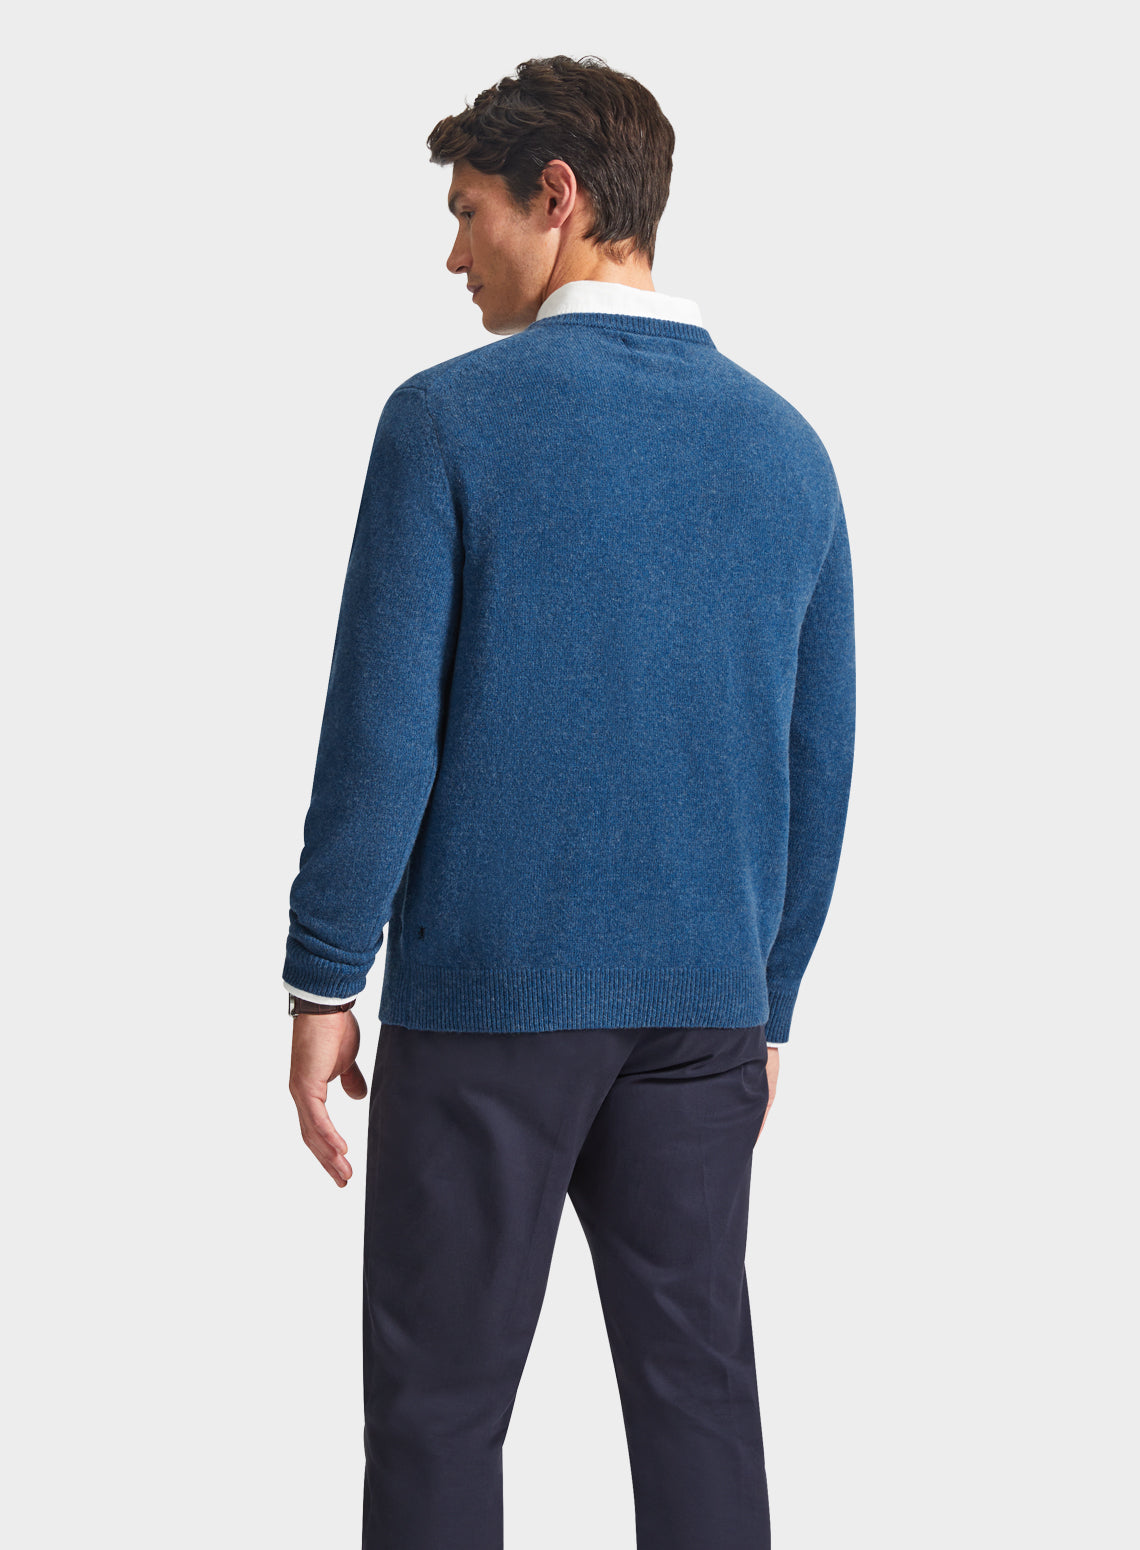 Mens Lambswool Crew Neck Jumper in Blue - Oxford Shirt Co.